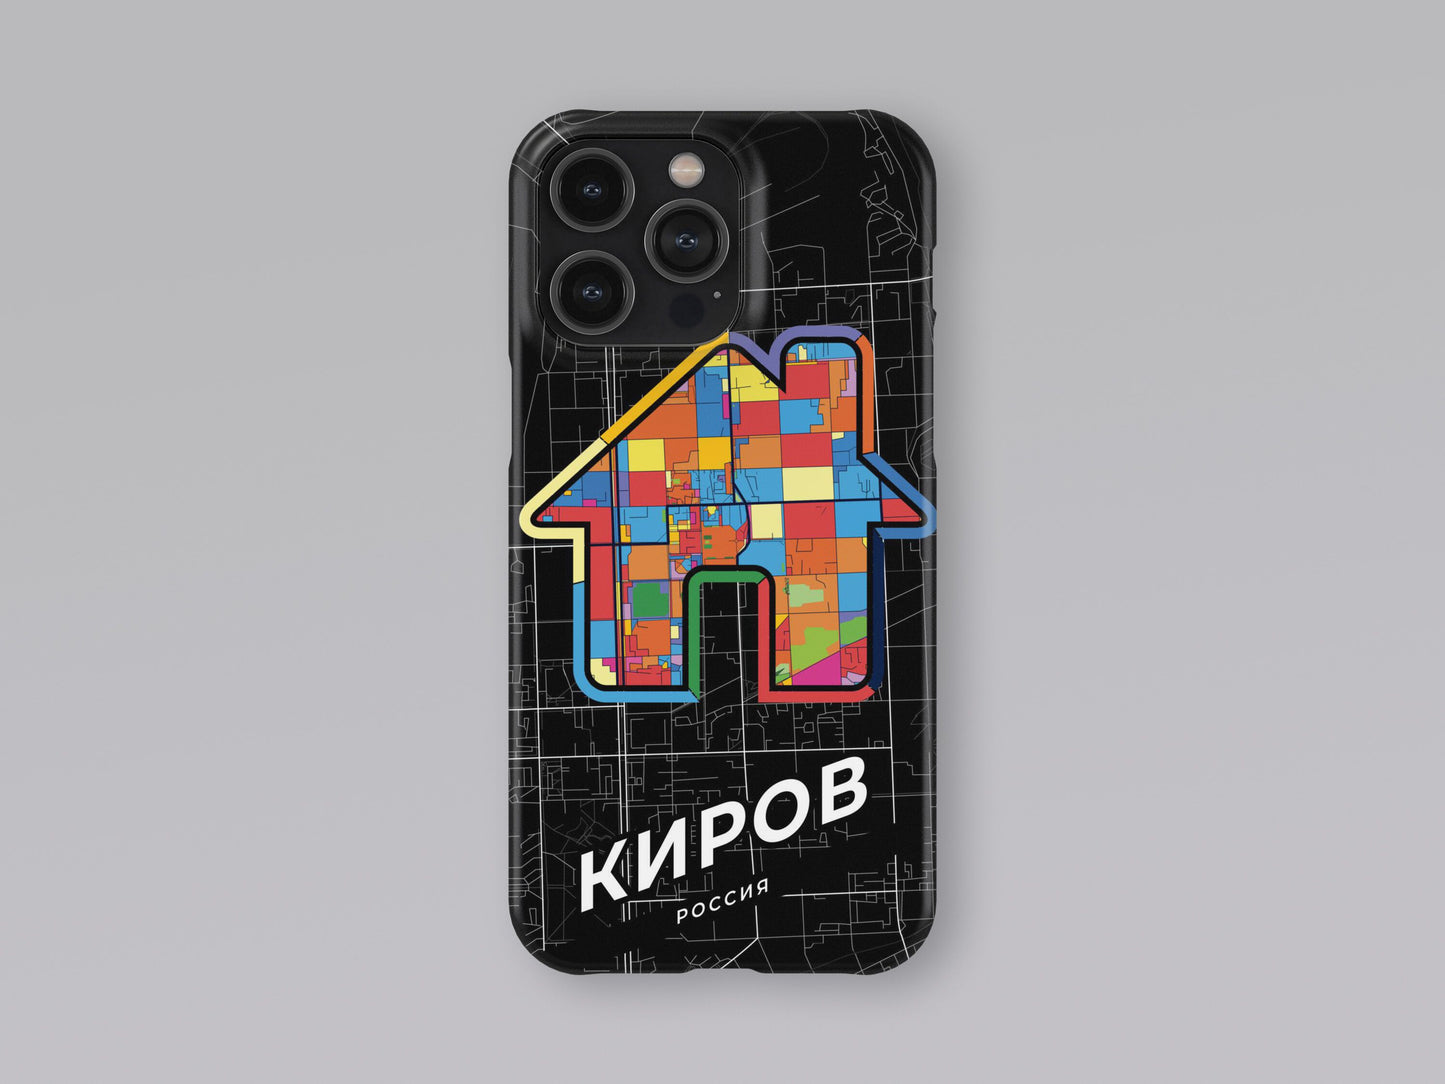 Kirov Russia slim phone case with colorful icon. Birthday, wedding or housewarming gift. Couple match cases. 3